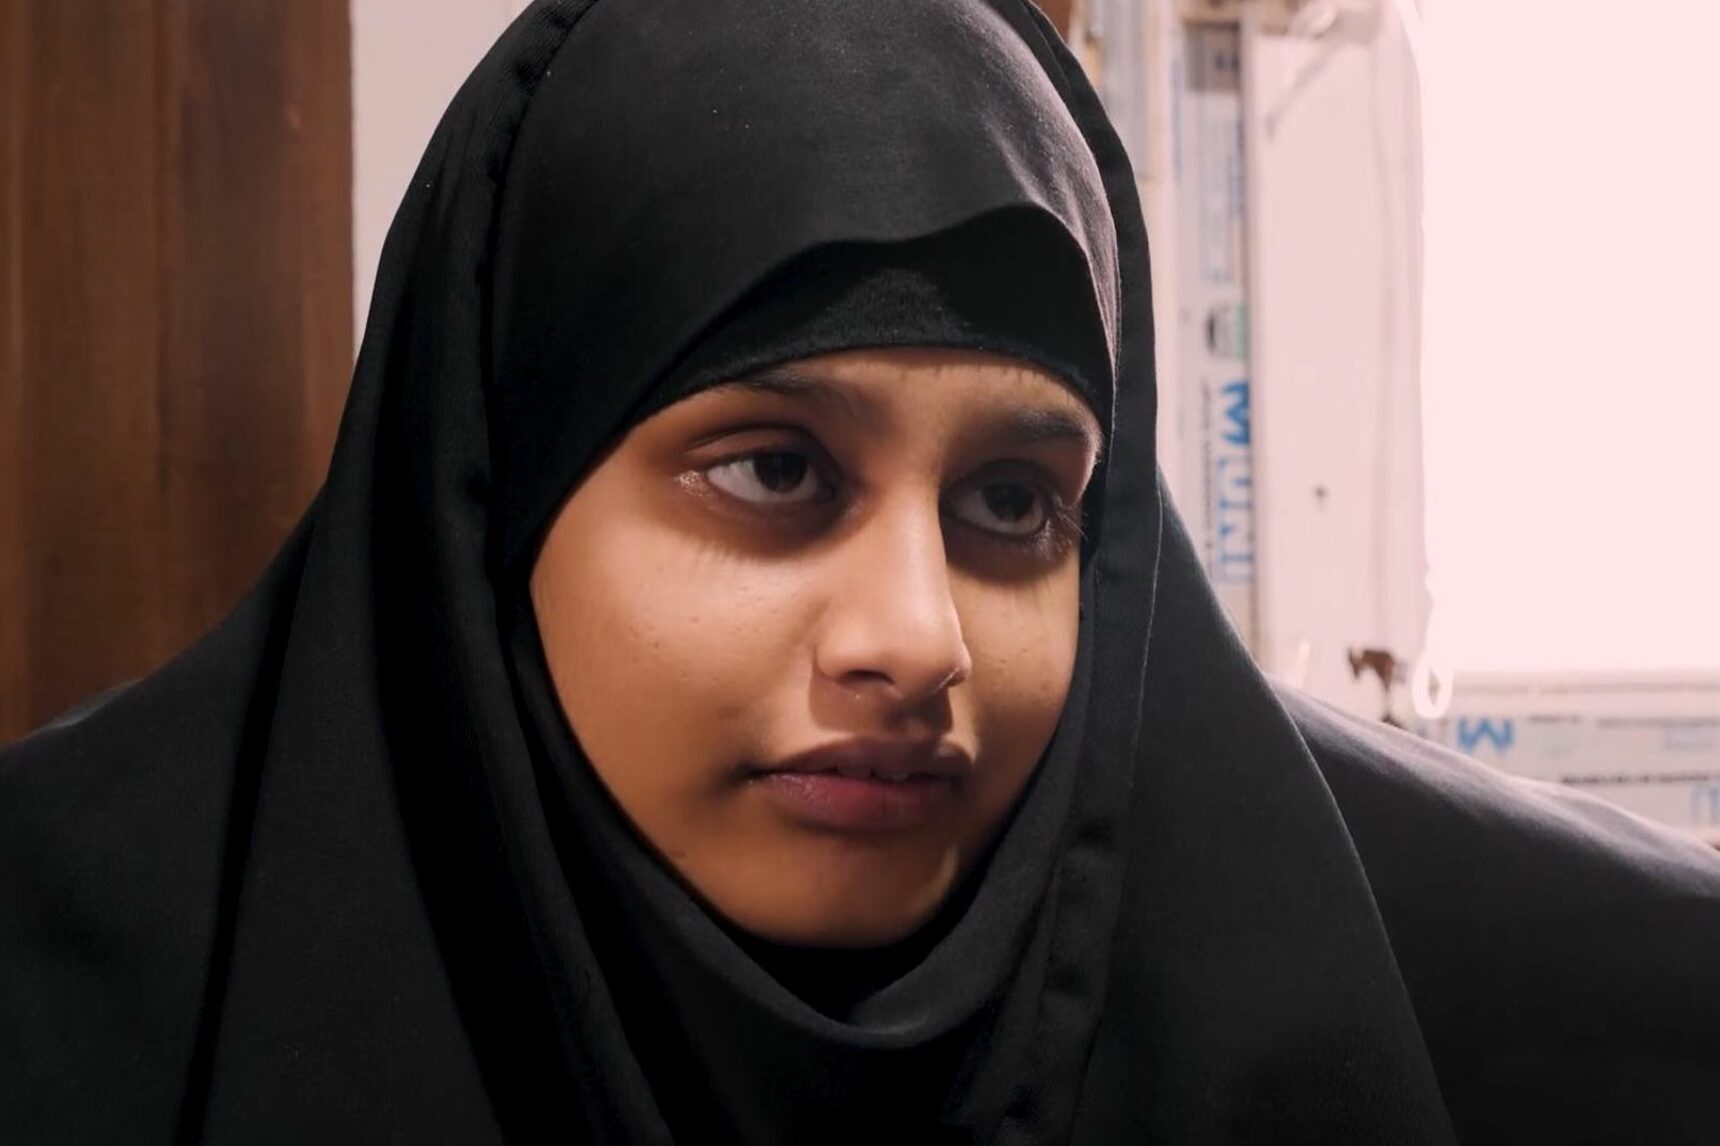 Shamima Begum: ISIS bride begs for forgiveness to return home